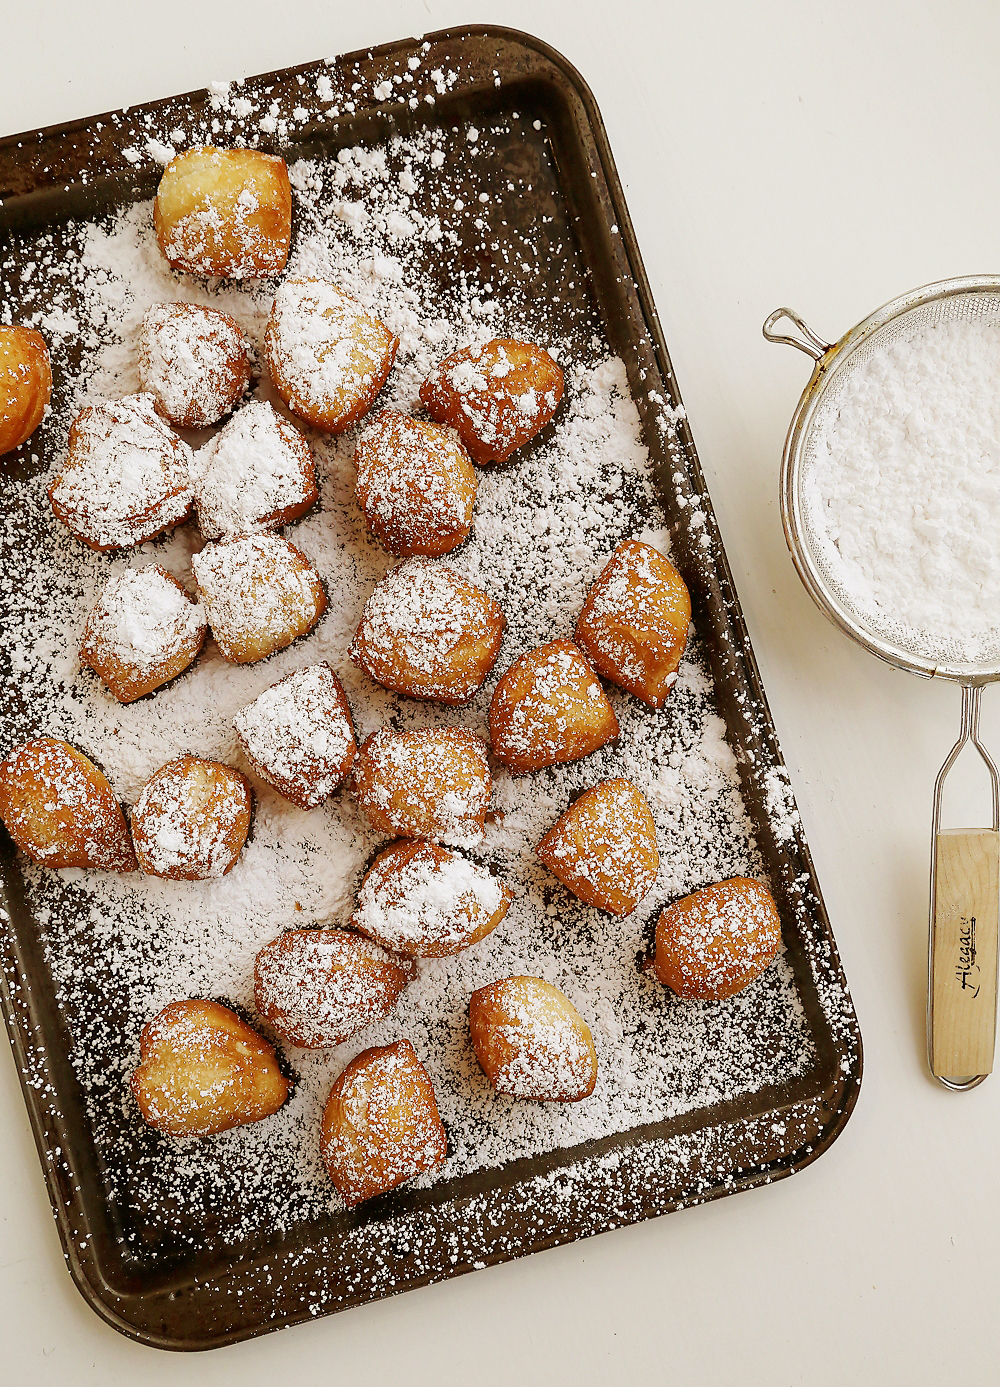 3-Ingredient Beignet Bites - Deliciously fluffy, soft mini beignets made easily for breakfast, brunch or dessert! Thecomfortofcooking.com